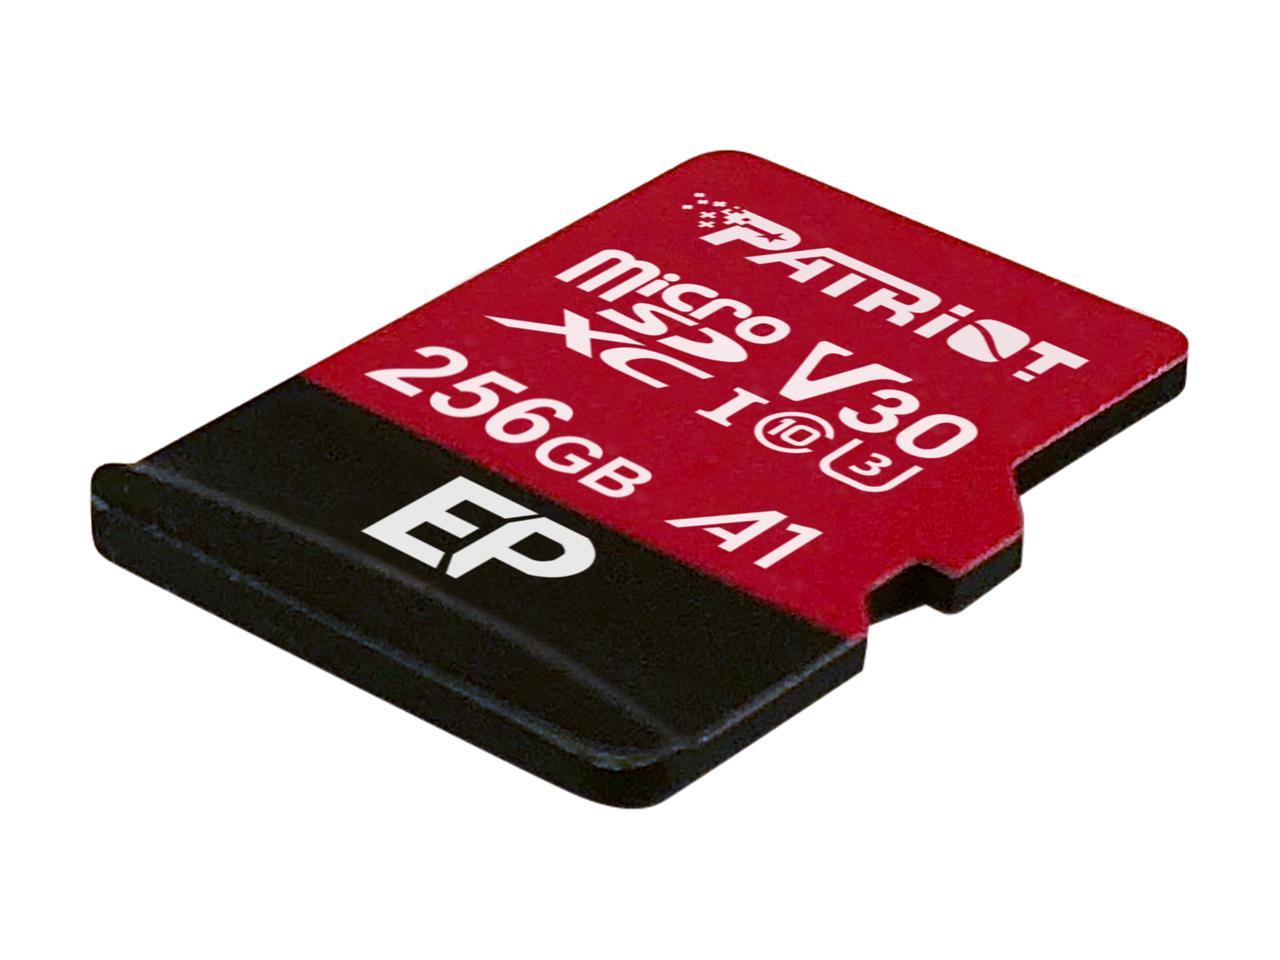 Patriot 256GB EP Series MicroSDXC U3, A1, V30. 4K Memory Card with Adapter, Reads 90MB/s, Writes 80MB/s